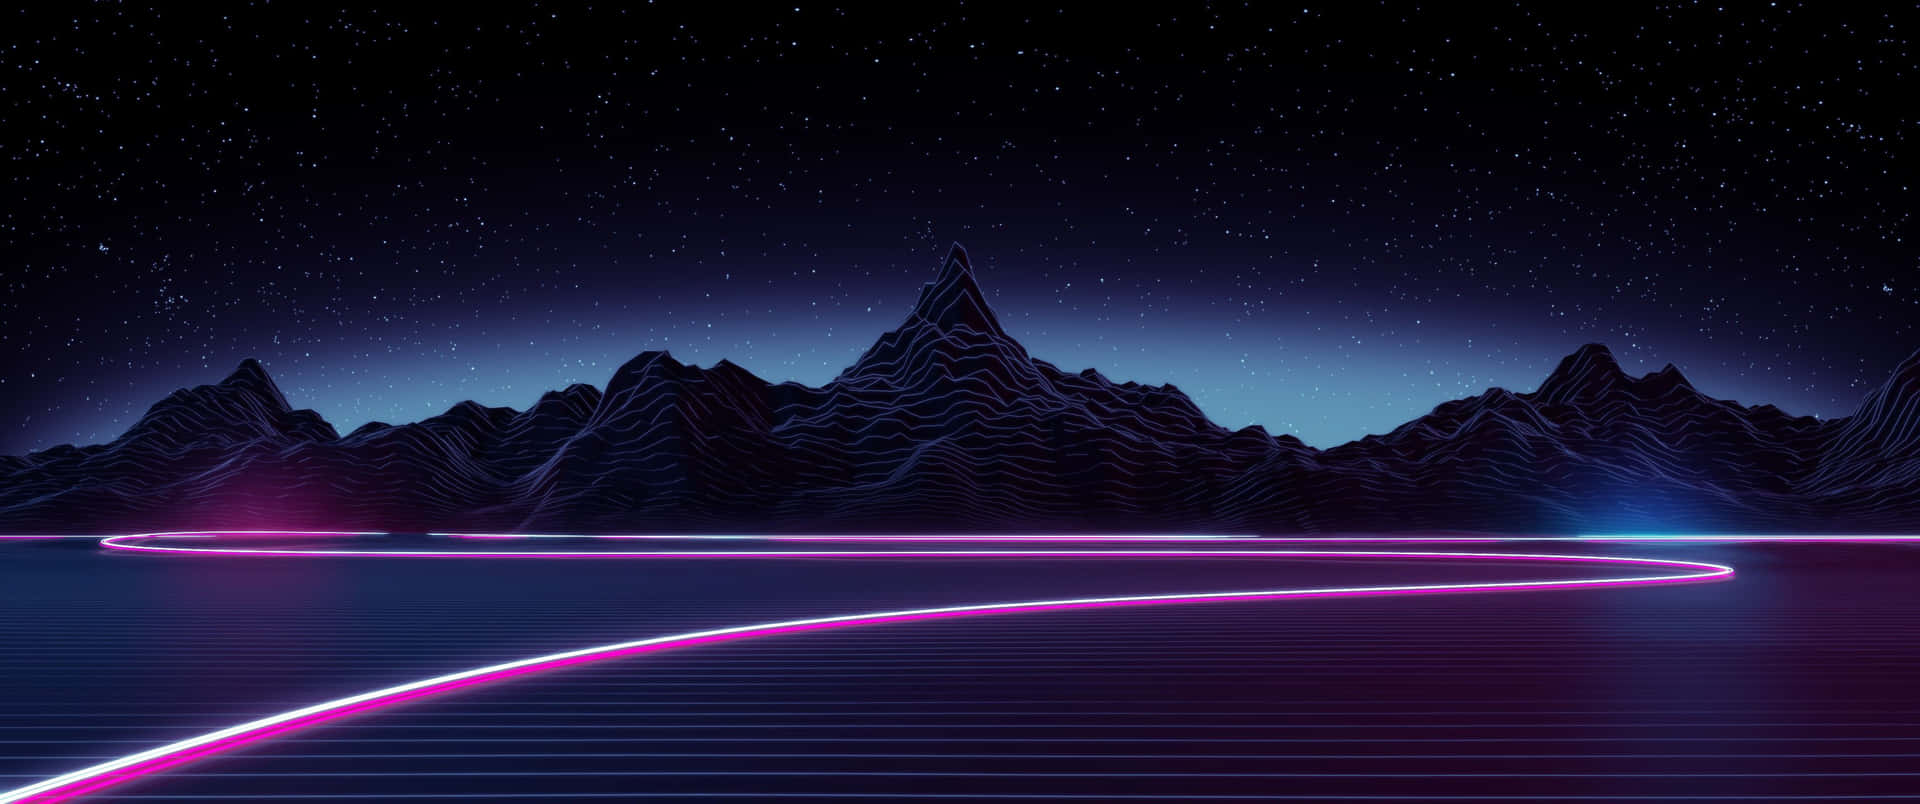 A Pink Neon Line In The Night Sky Wallpaper